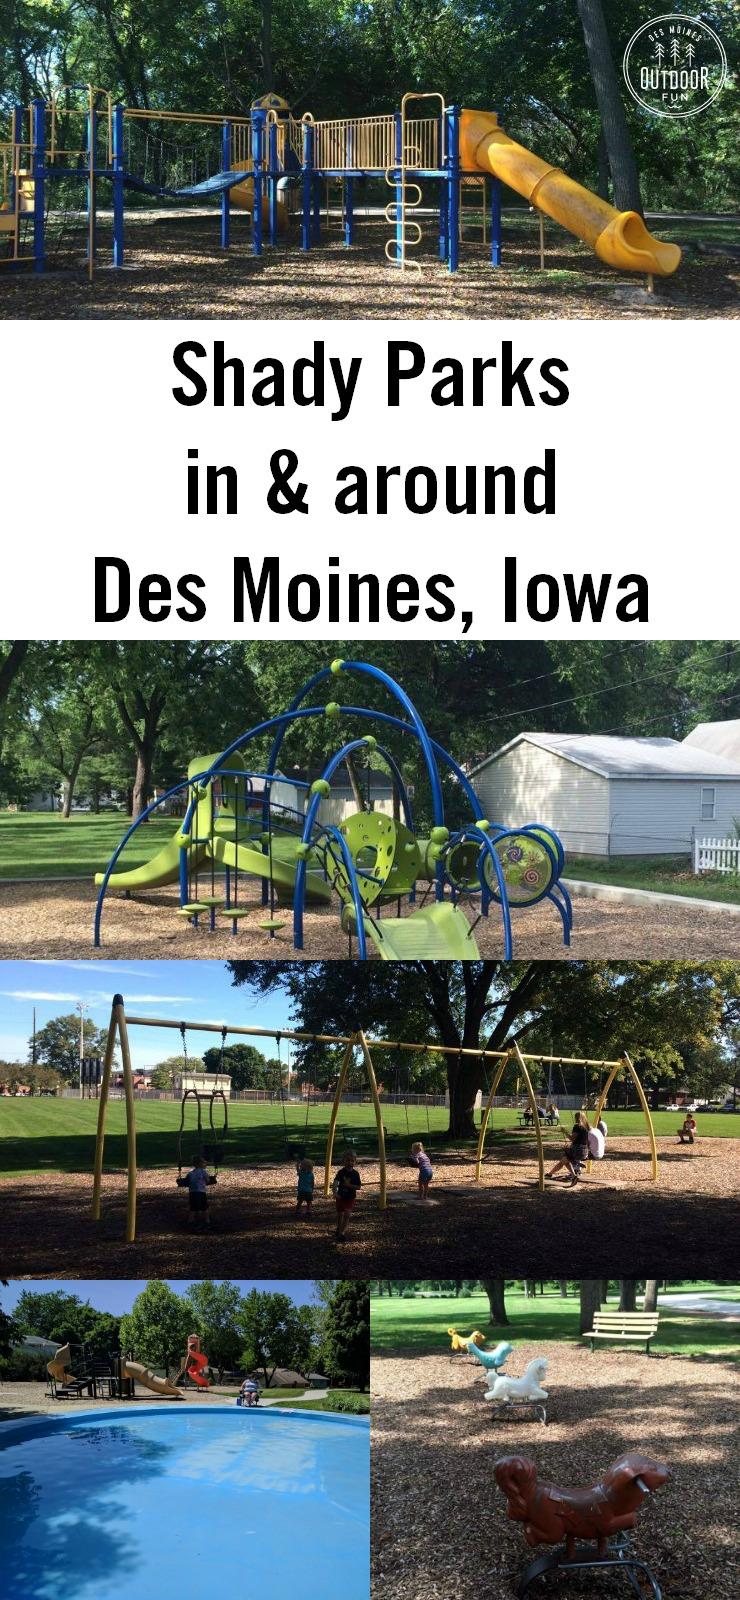 Shady parks in Des Moines, Iowa and surrounding suburbs - find shaded playgrounds for summer!